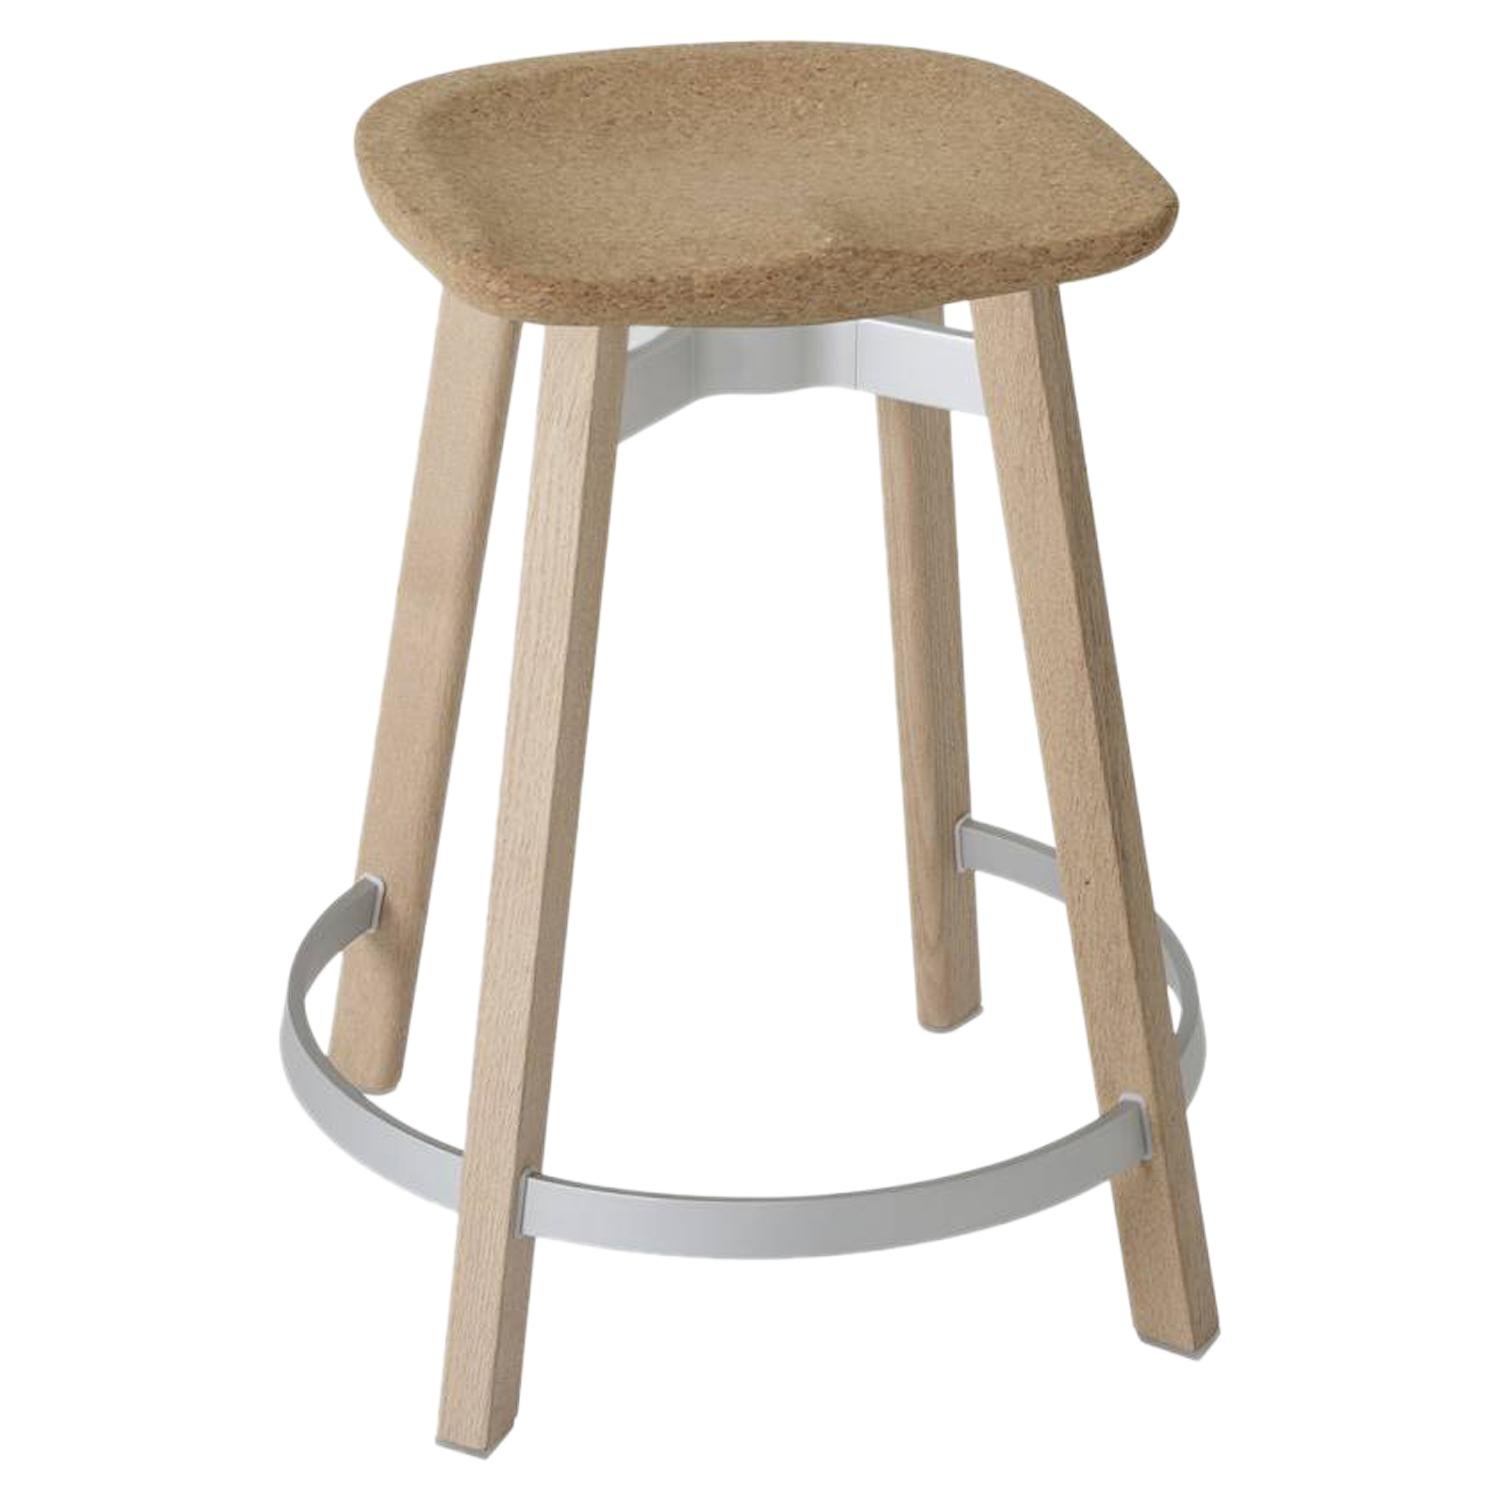 Emeco Su Counter Stool in Wood with Cork Seat by Nendo